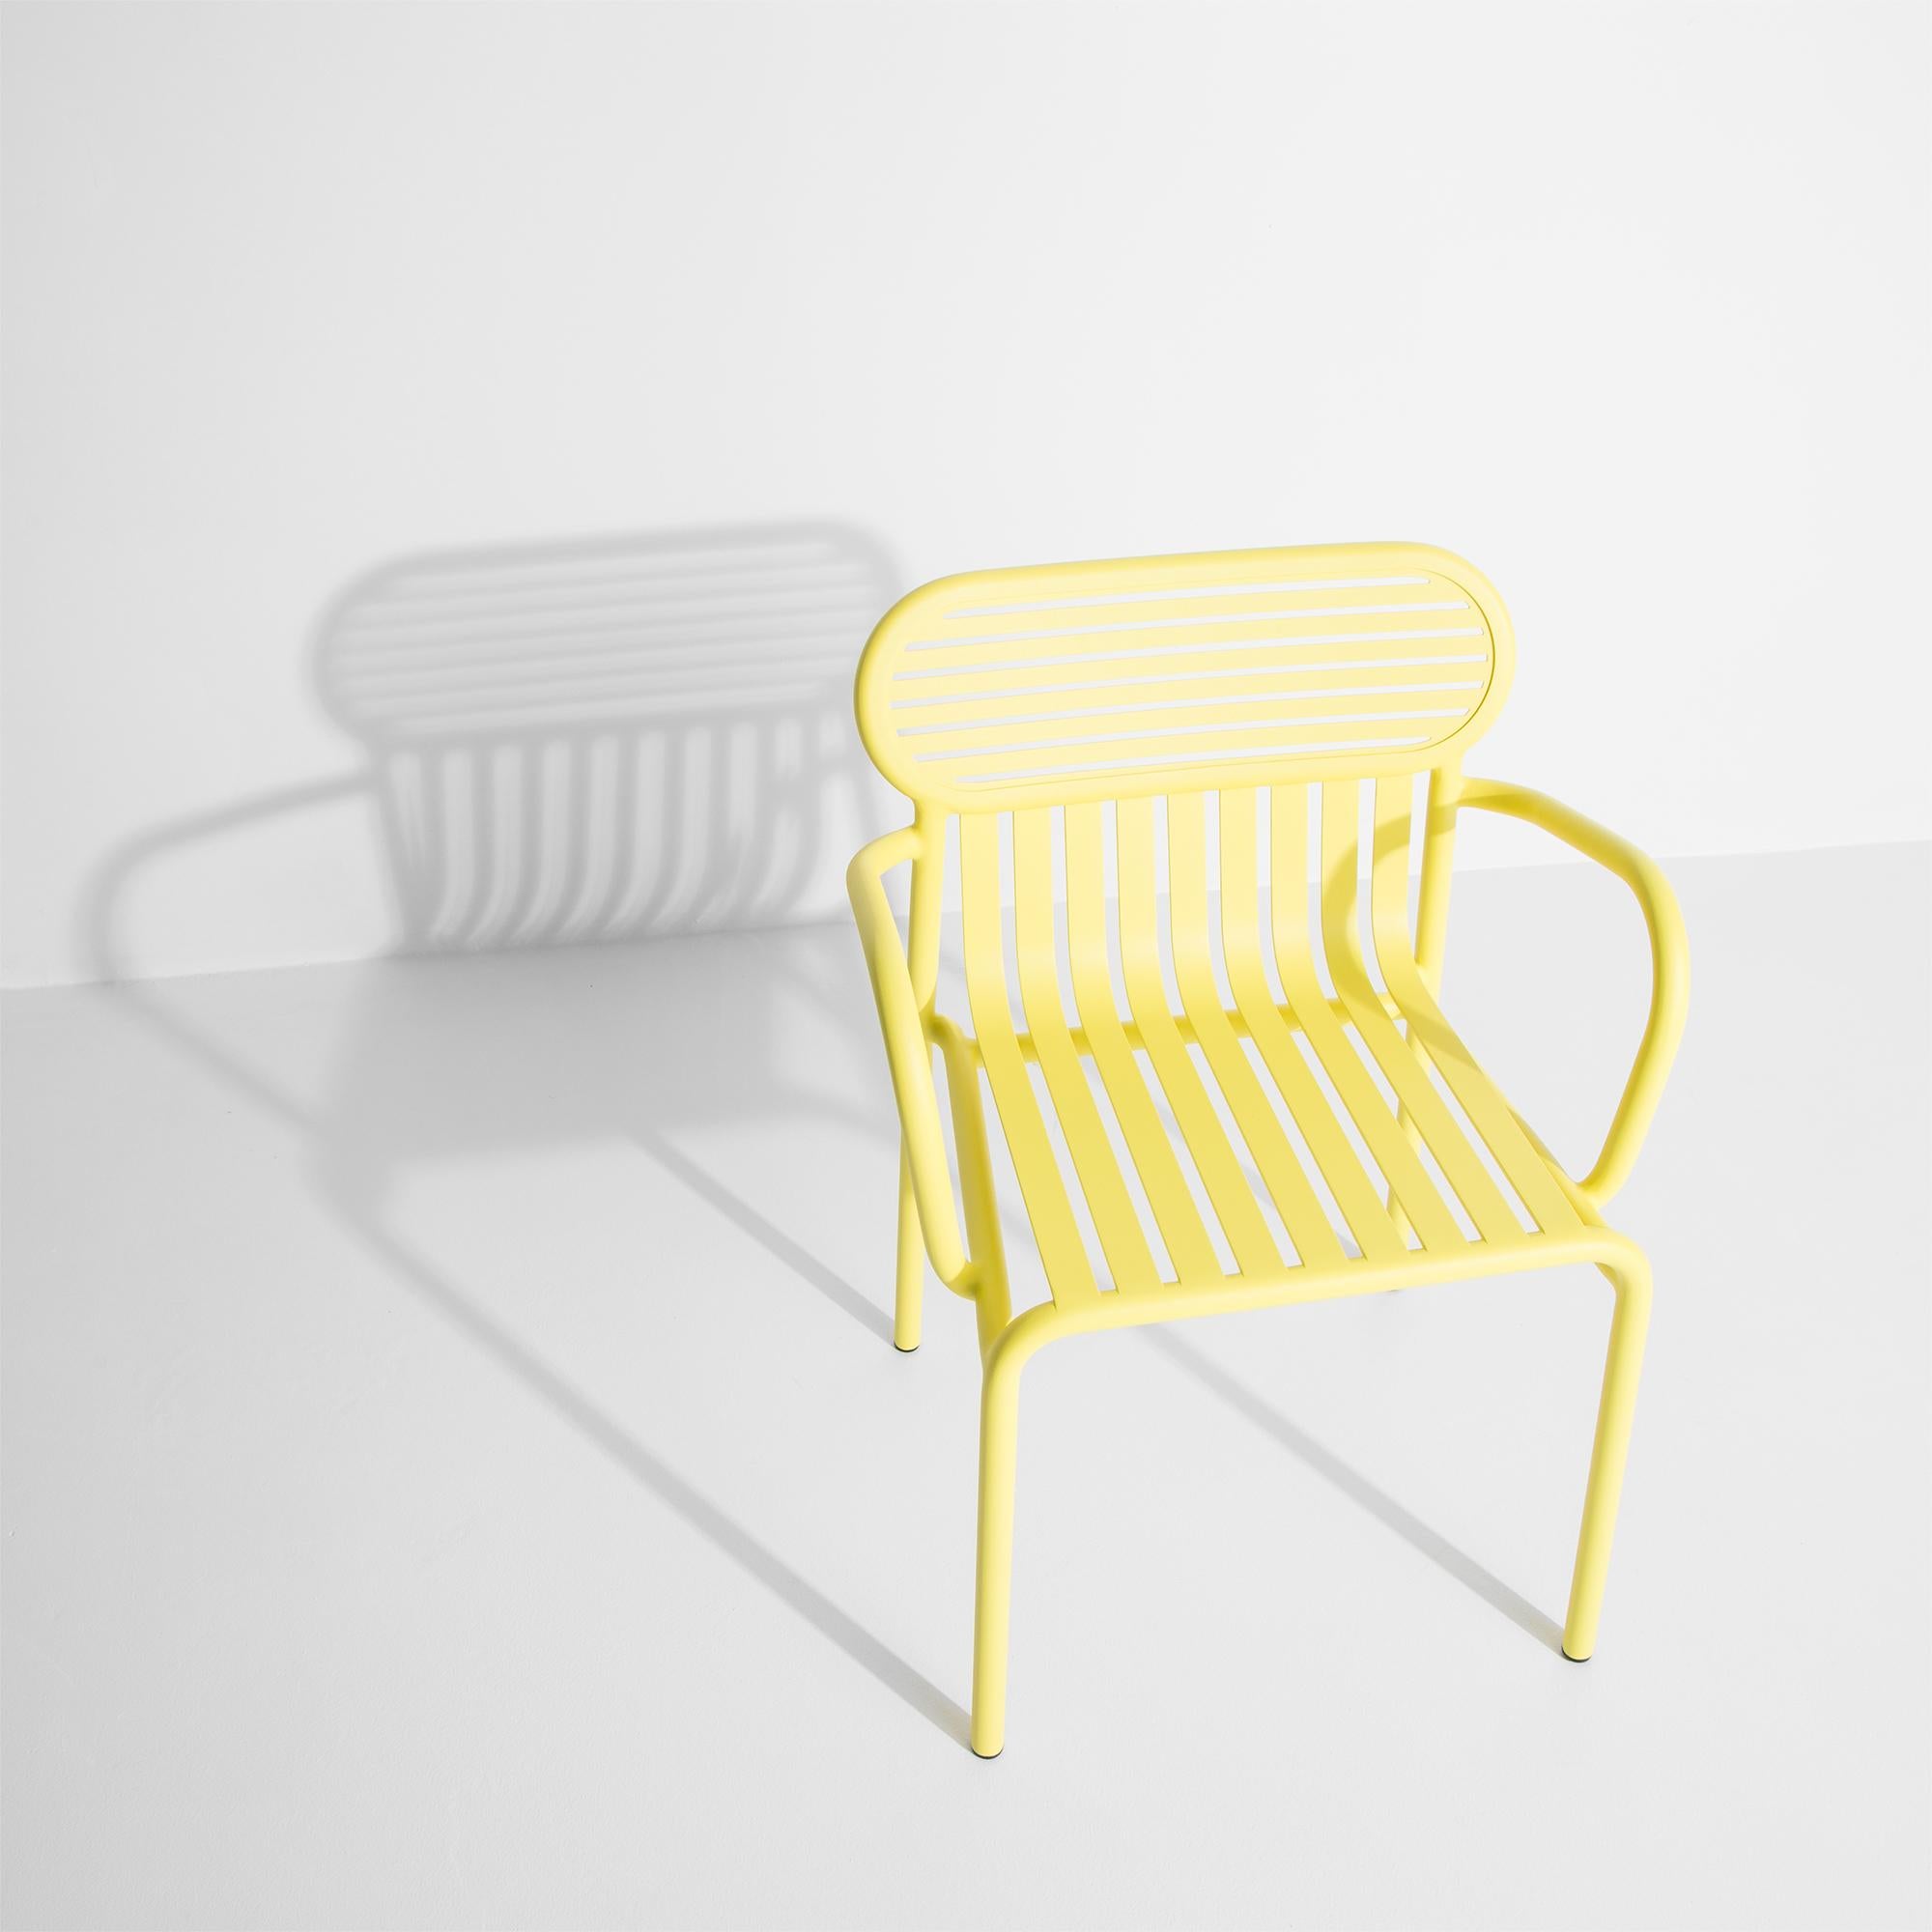 Petite Friture Week-End Bridge Chair in Yellow Aluminium by Studio BrichetZiegler, 2017

The week-end collection is a full range of outdoor furniture, in aluminium grained epoxy paint, matt finish, that includes 18 functions and 8 colours for the